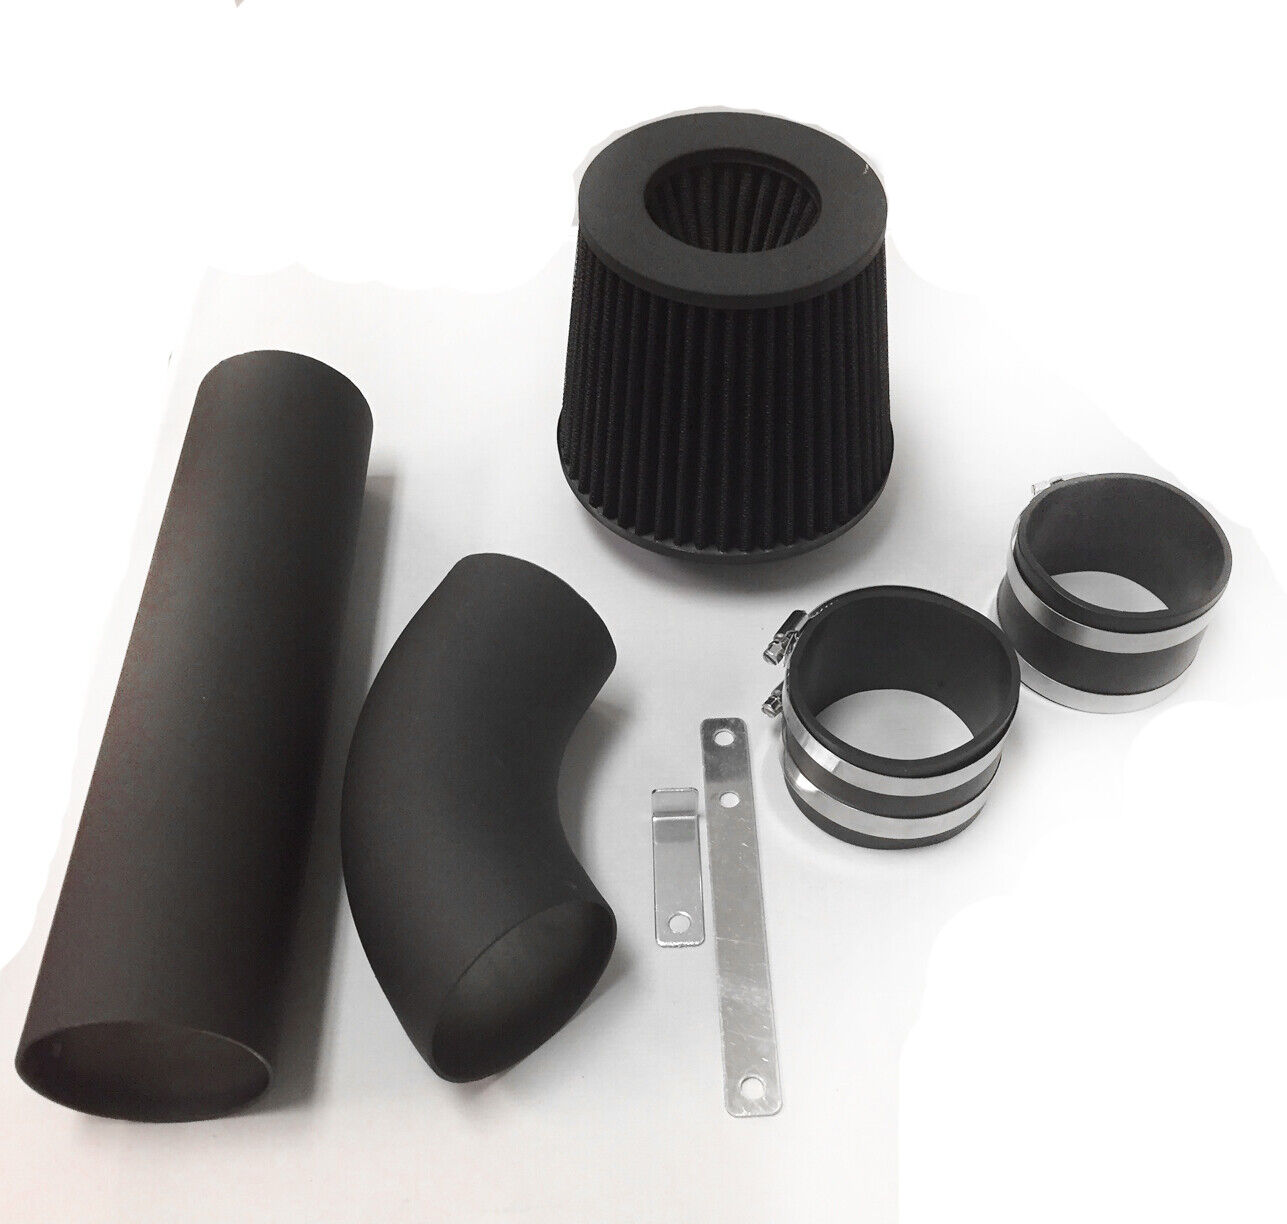 Coated Black For 2PC 2004-2008 Acura TL 3.2L V6 Base Cold Air Intake Kit